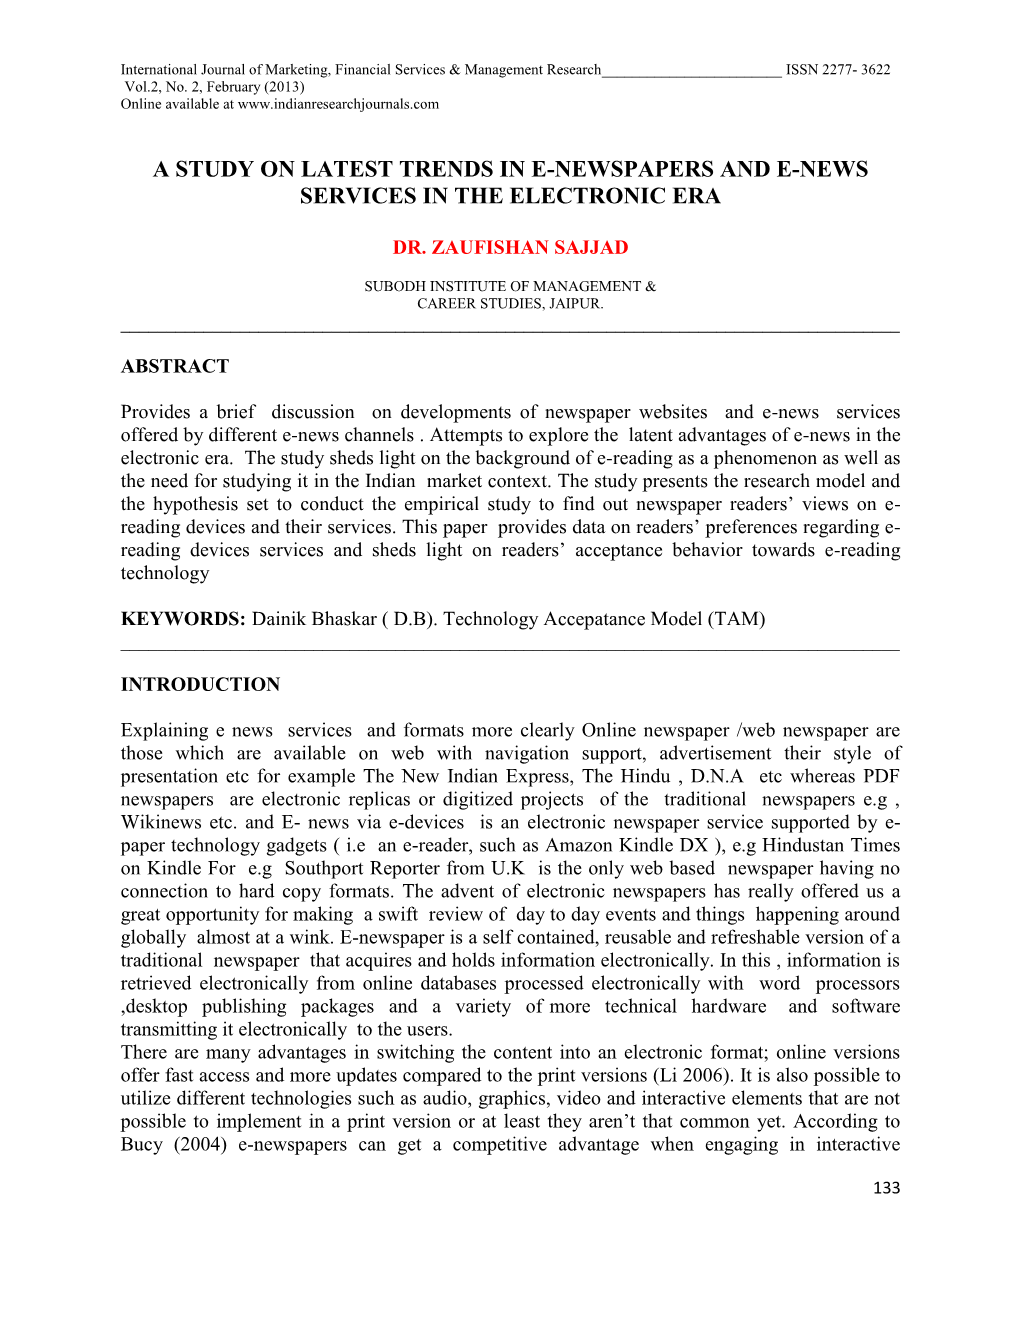 A Study on Latest Trends in E-Newspapers and E-News Services in the Electronic Era